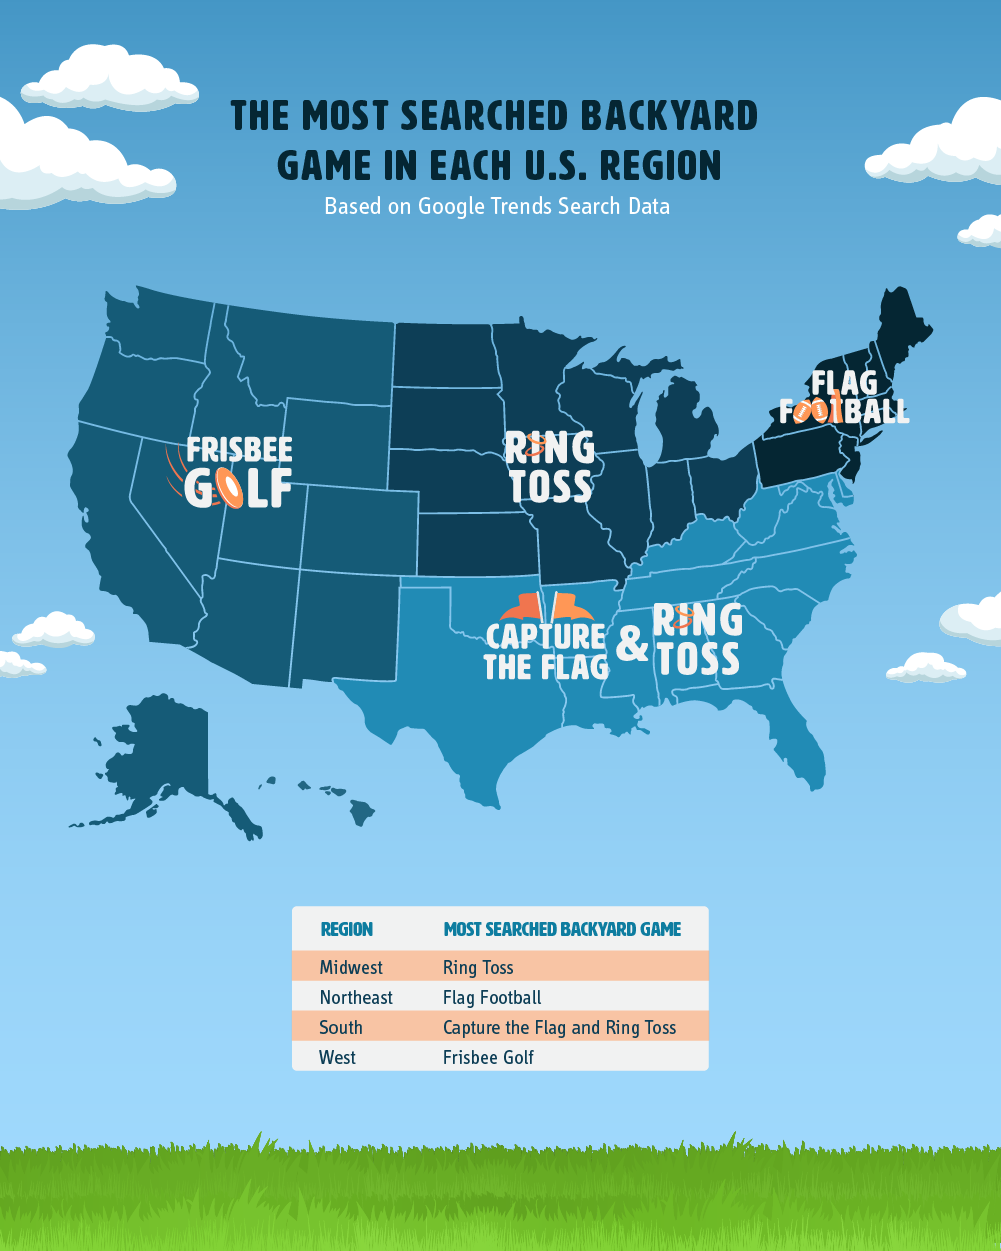 Map showing the most searched backyard game by region